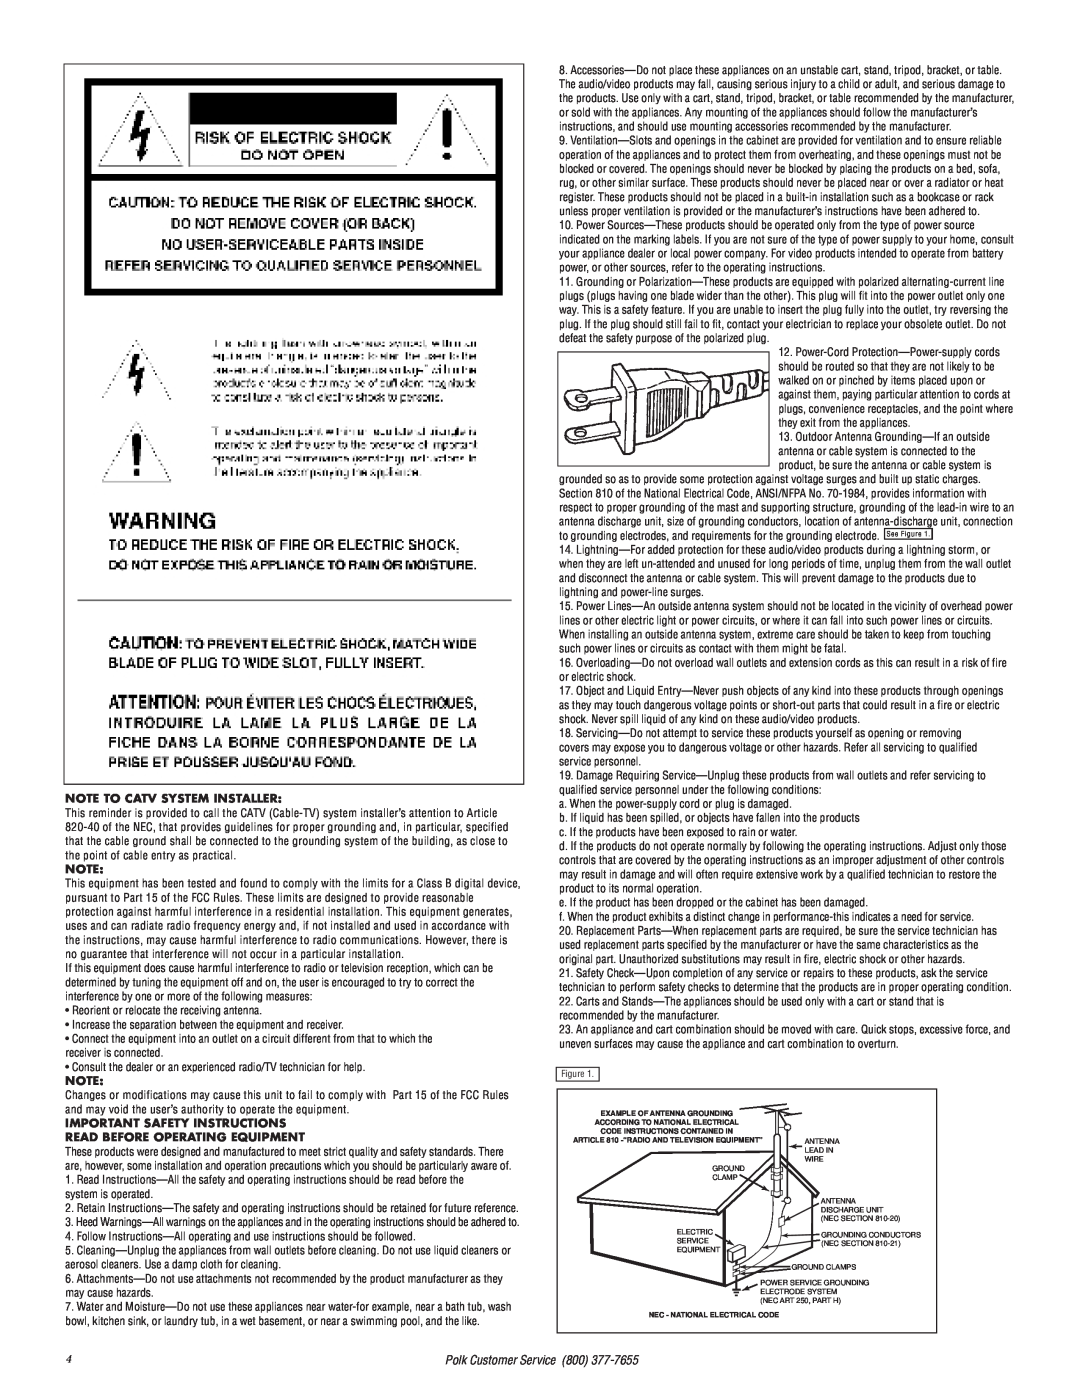 Polk Audio 2 Note To Catv System Installer, Important Safety Instructions, Read Before Operating Equipment 